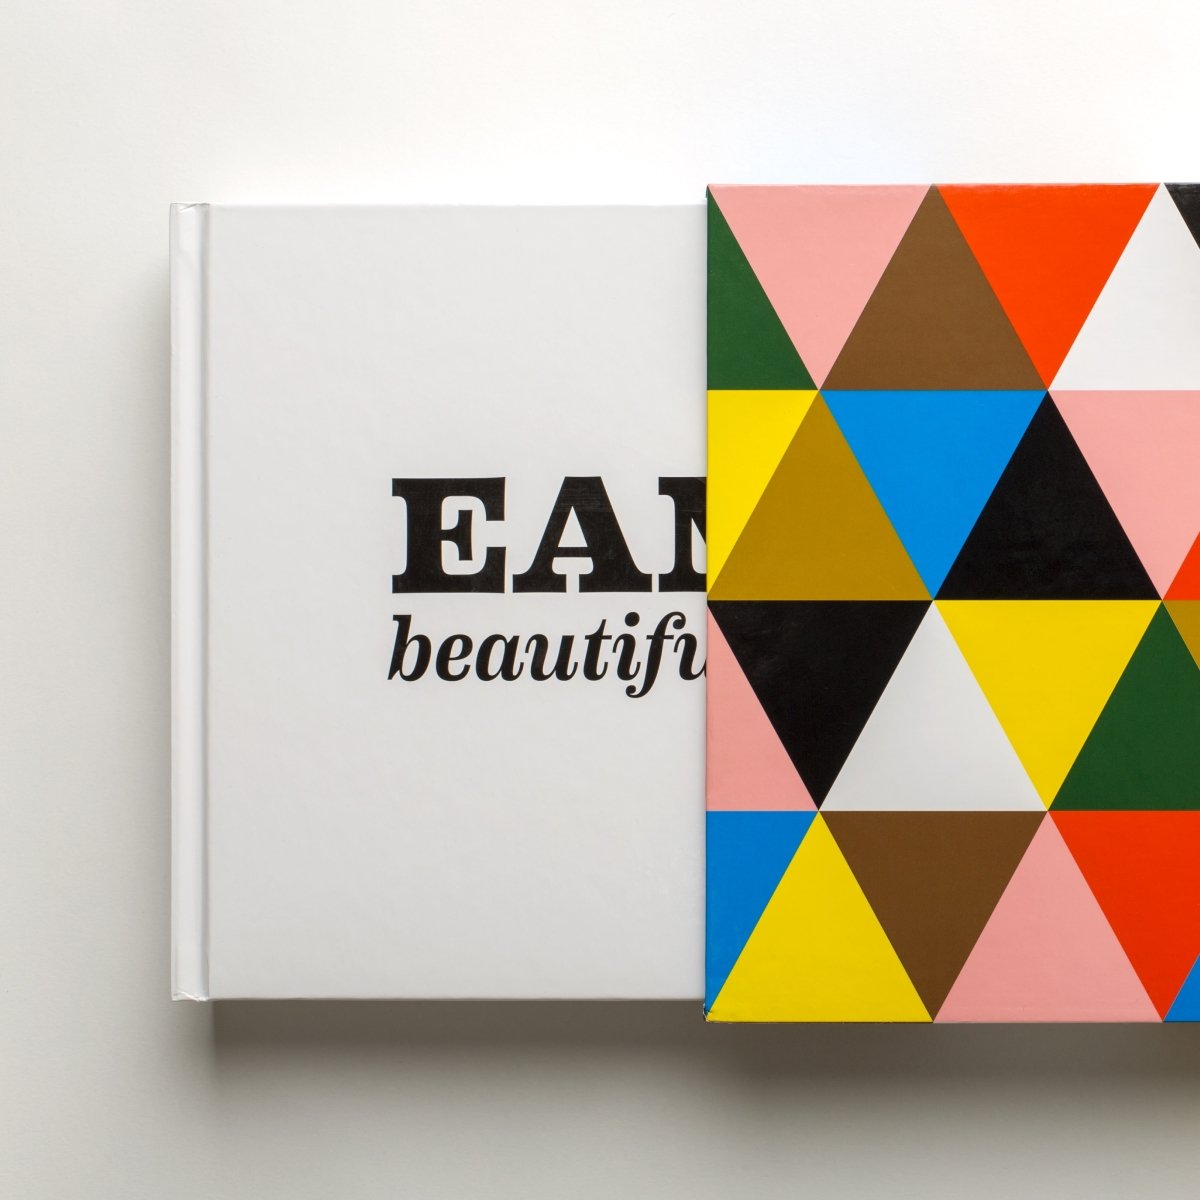 Eames Book - Beautiful Details - By Autotype